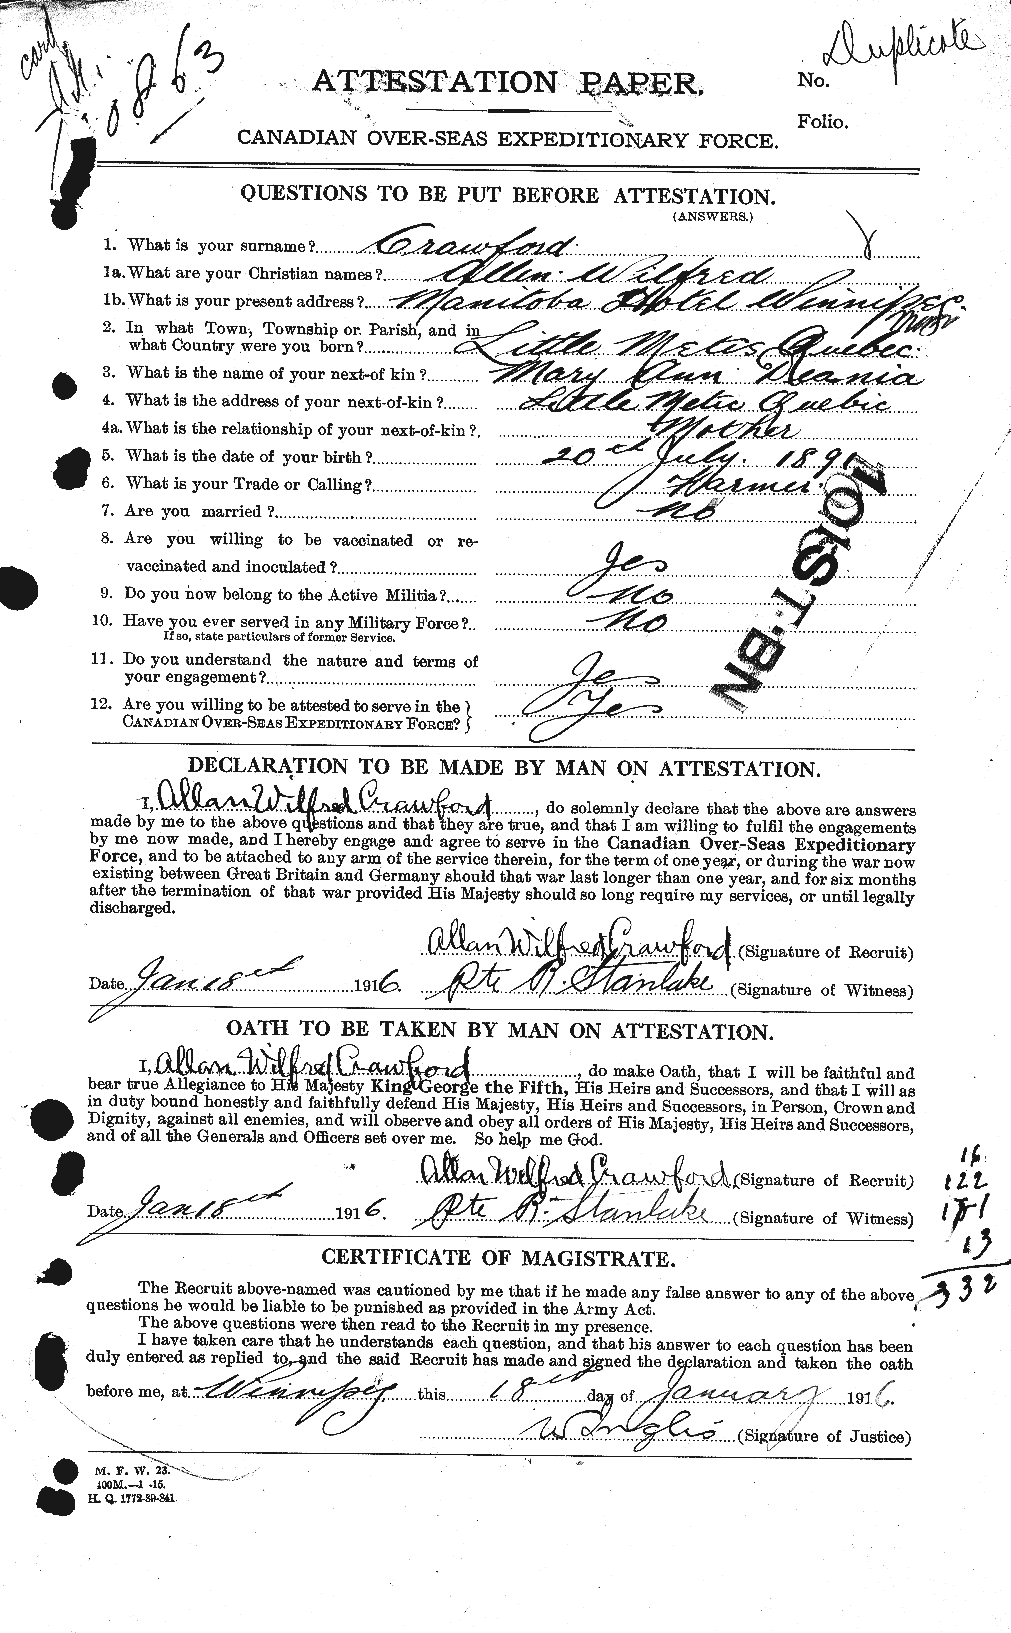 Personnel Records of the First World War - CEF 060947a